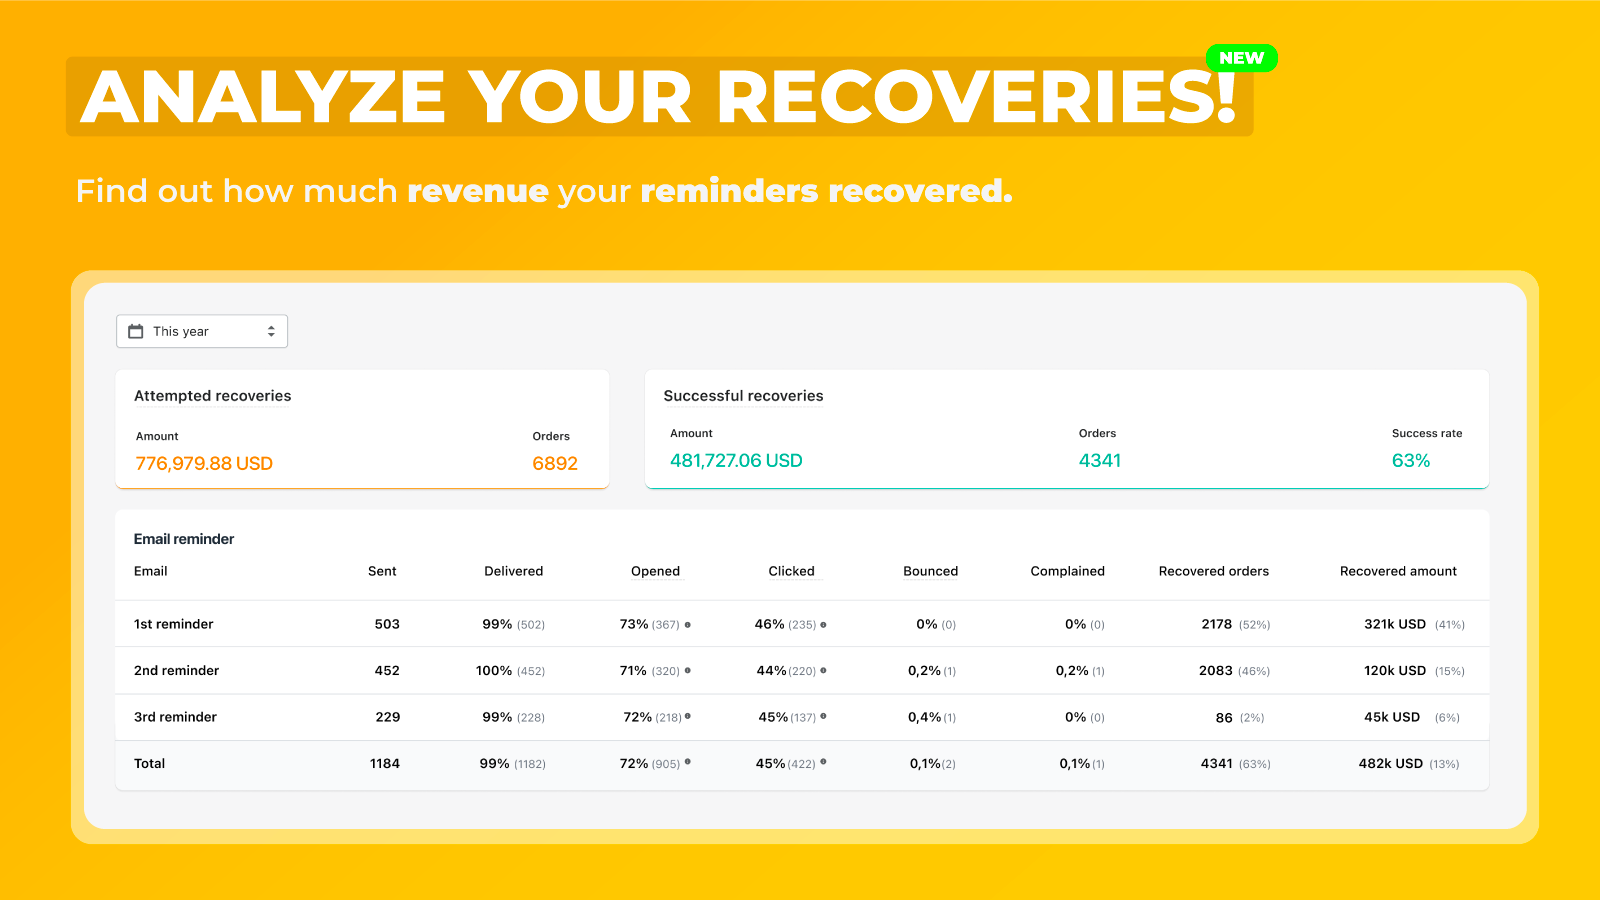 Analytics: Find out how much revenue you were able to recover.